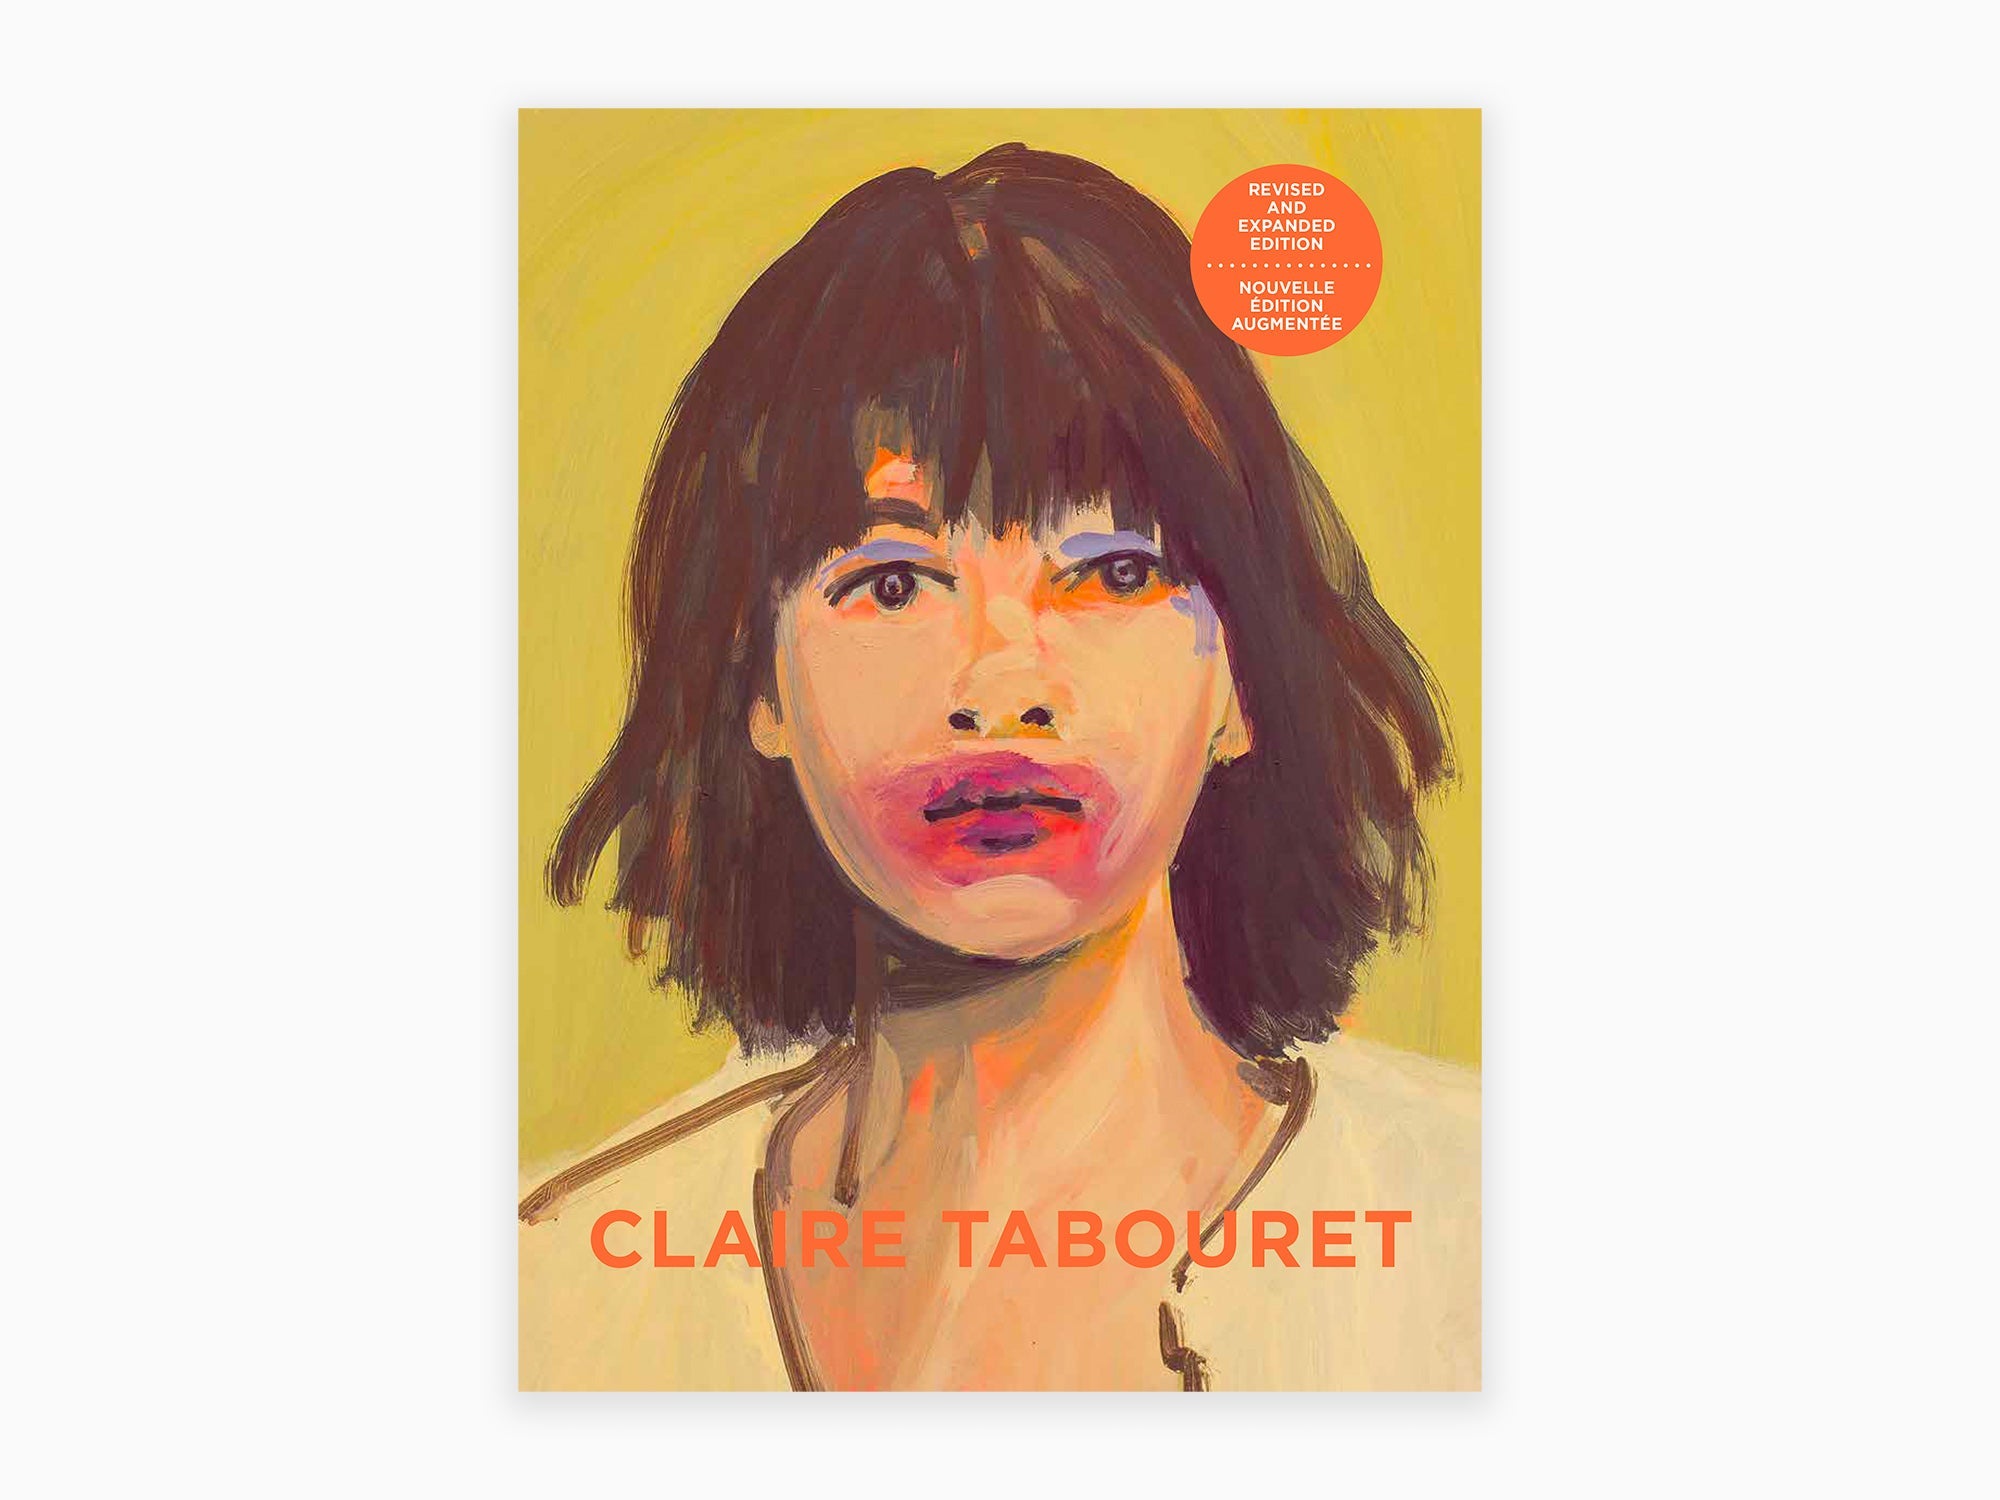 CLAIRE TABOURET - MONOGRAPH (REVISED AND EXPANDED EDITION)